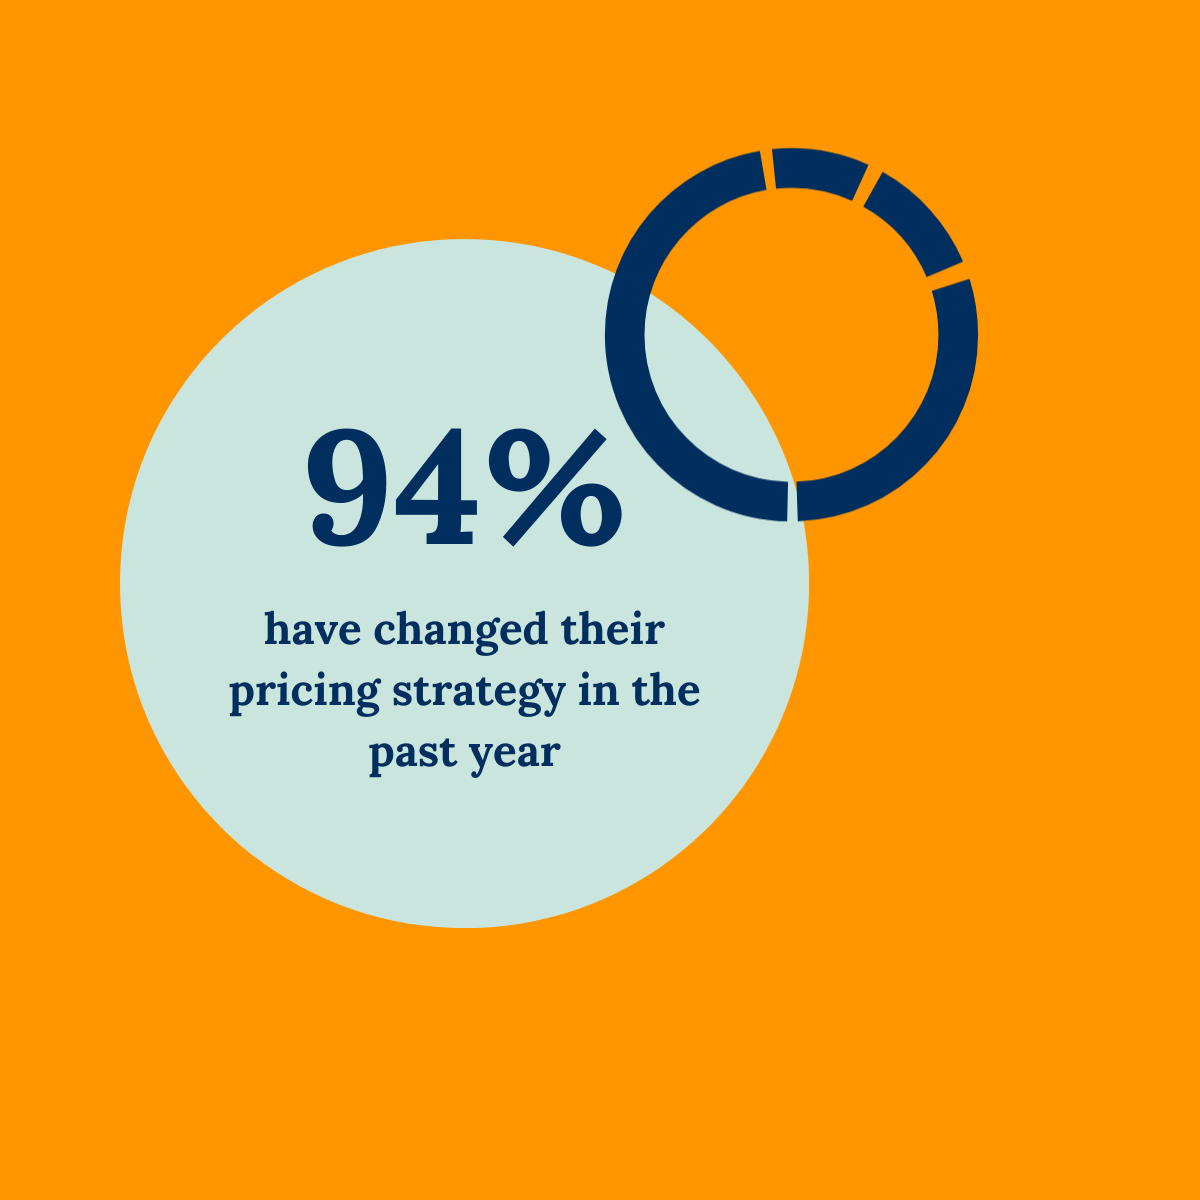 94% have changed their pricing strategy in the past year